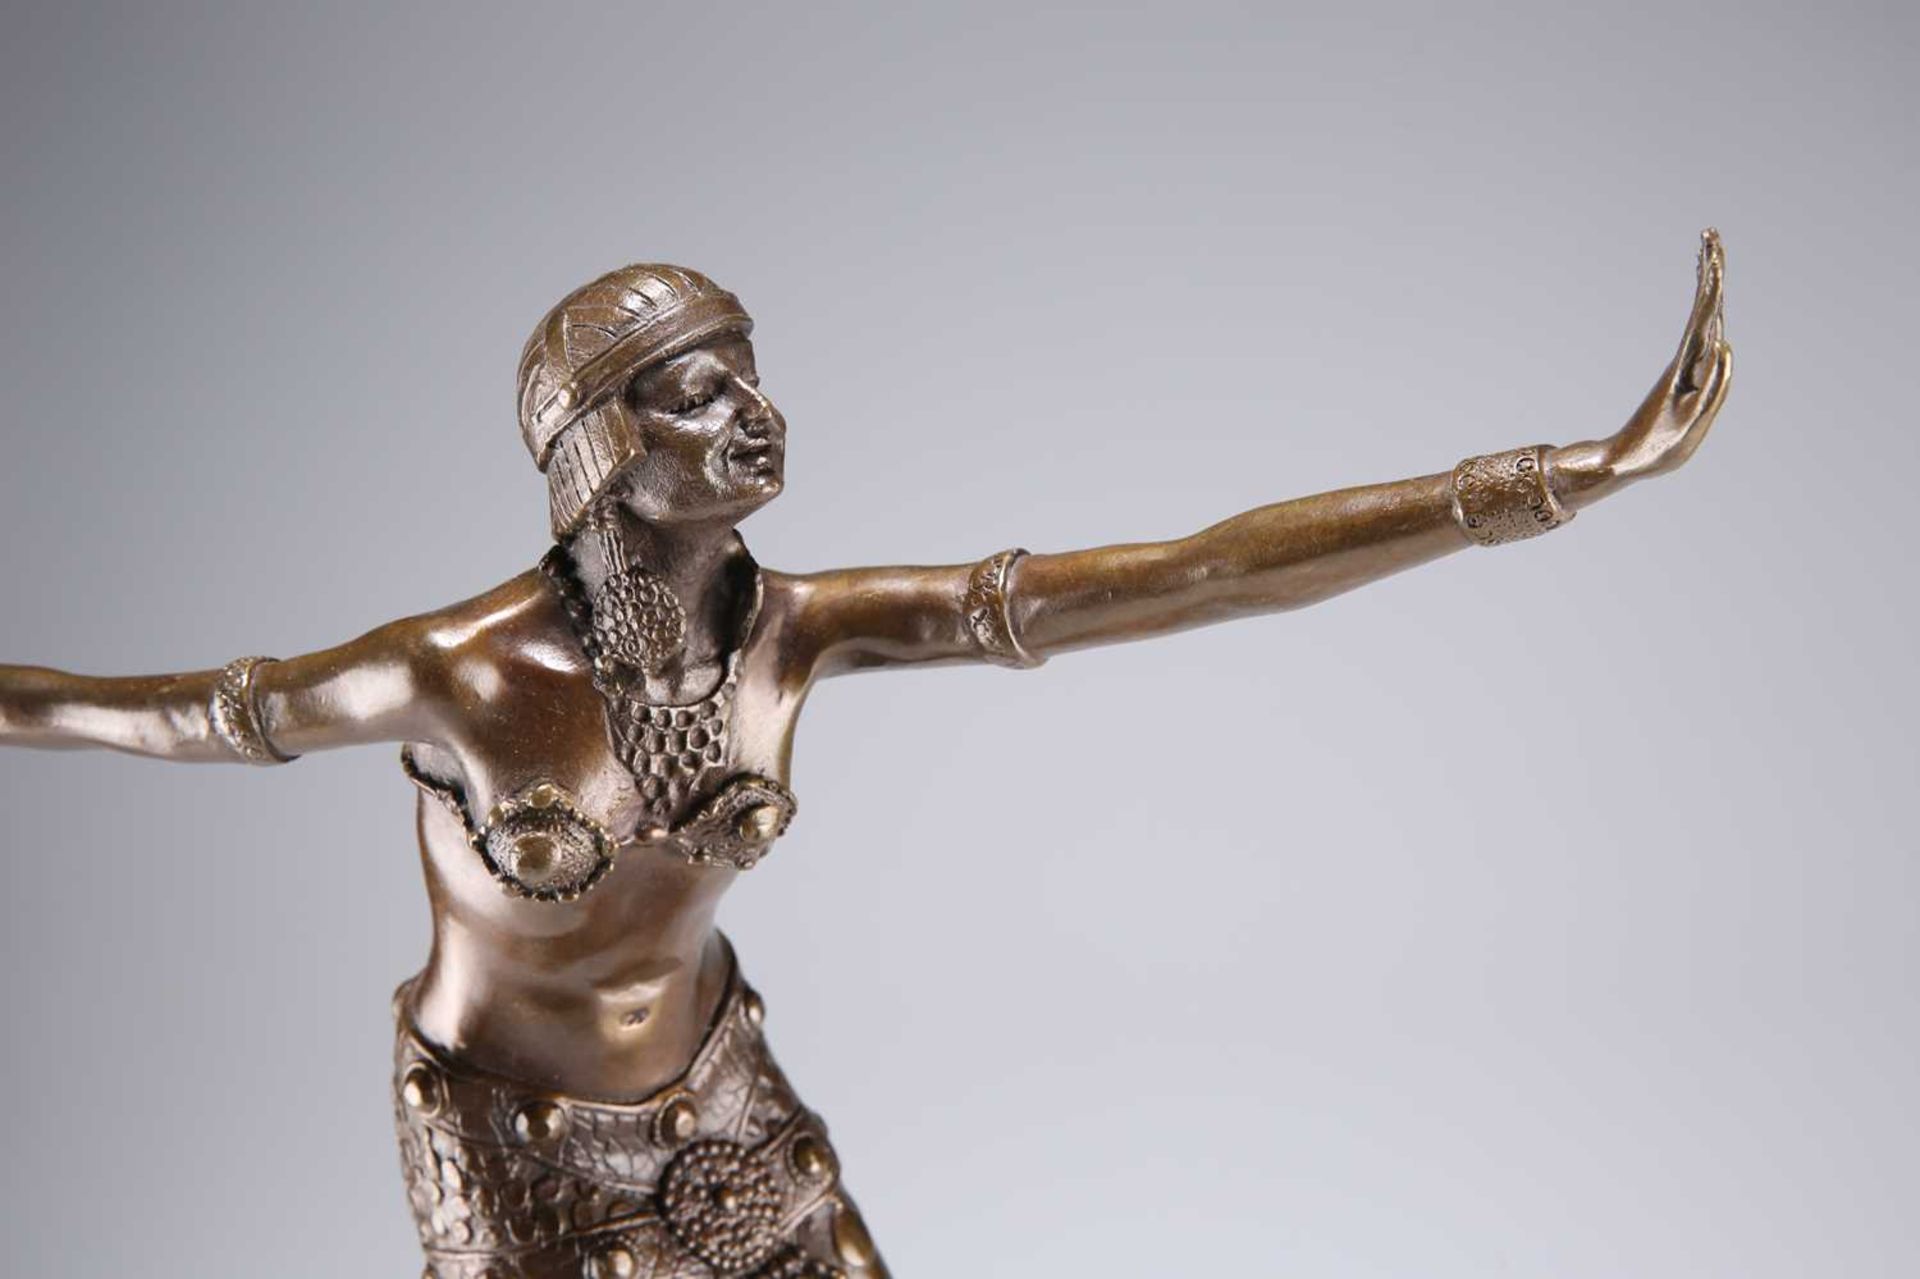 AN ART DECO STYLE BRONZE AND MARBLE FIGURE, THE 'PHOENICIAN DANCER' - Image 4 of 4